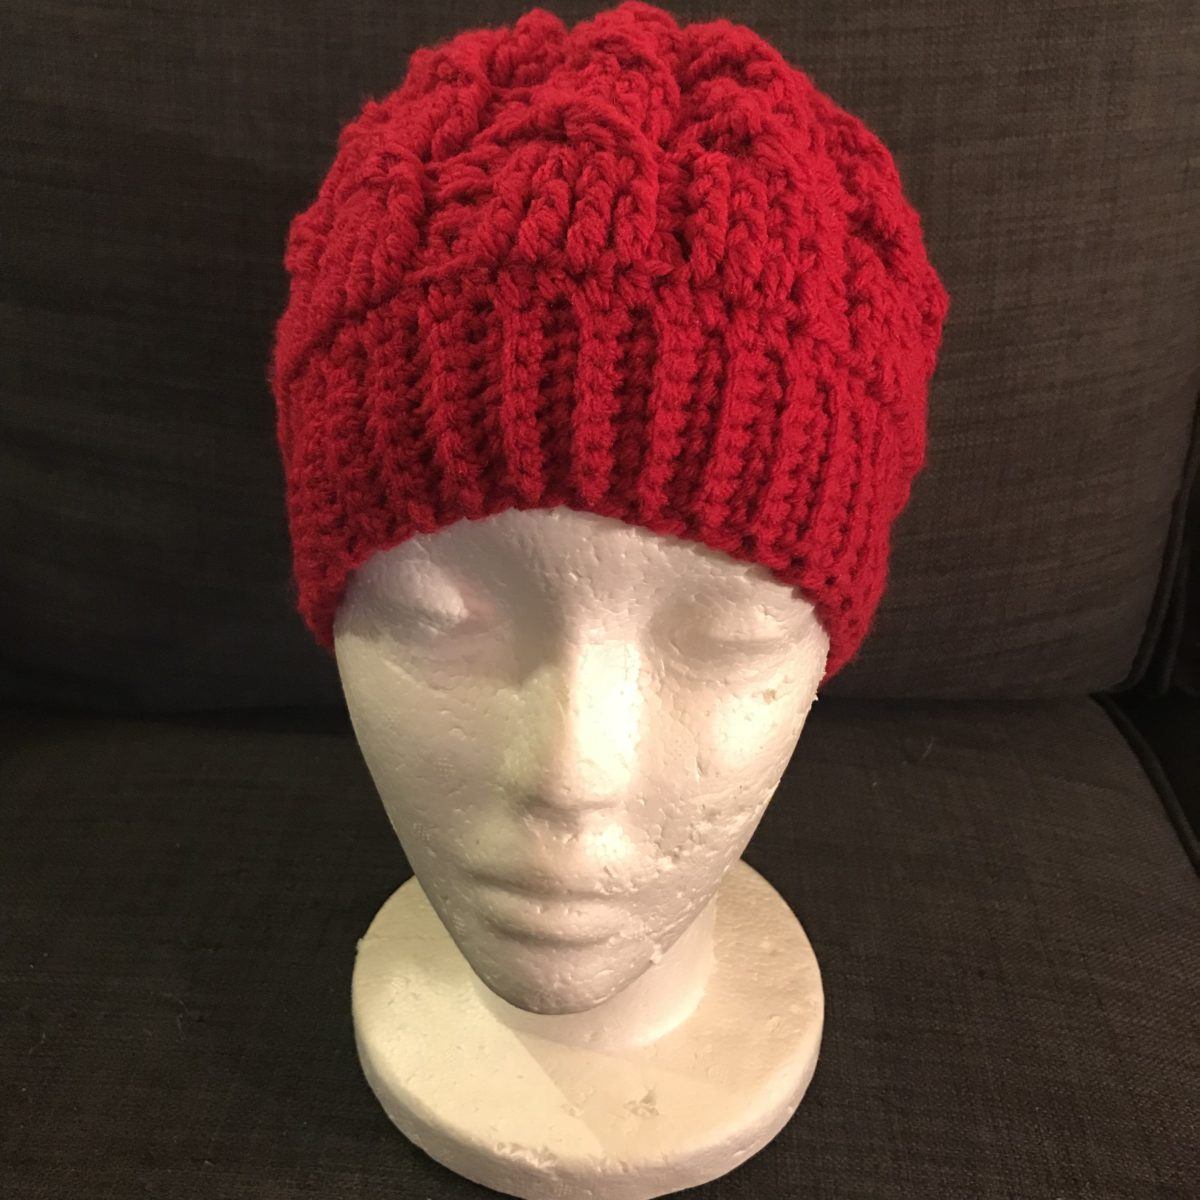 How To Crochet Cabled Beanie/Messy Bun Hat Tutorial - hookingisalifestyle